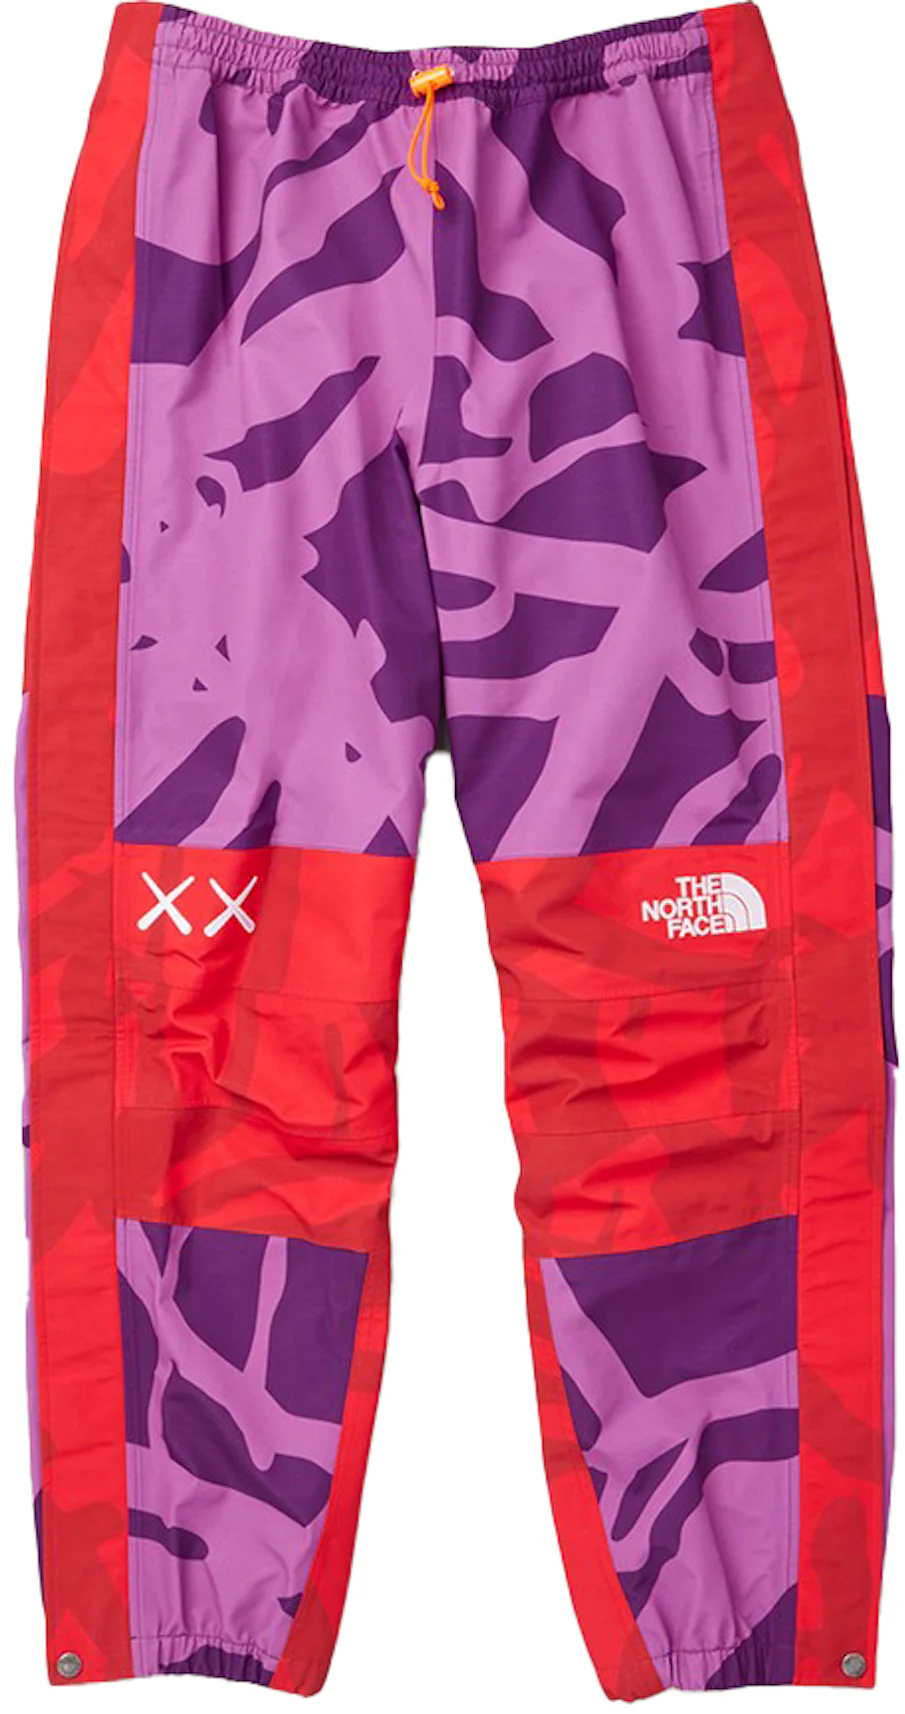 The North Face x Kaws Project Mountain Light Pant - Pamplona Purple XL